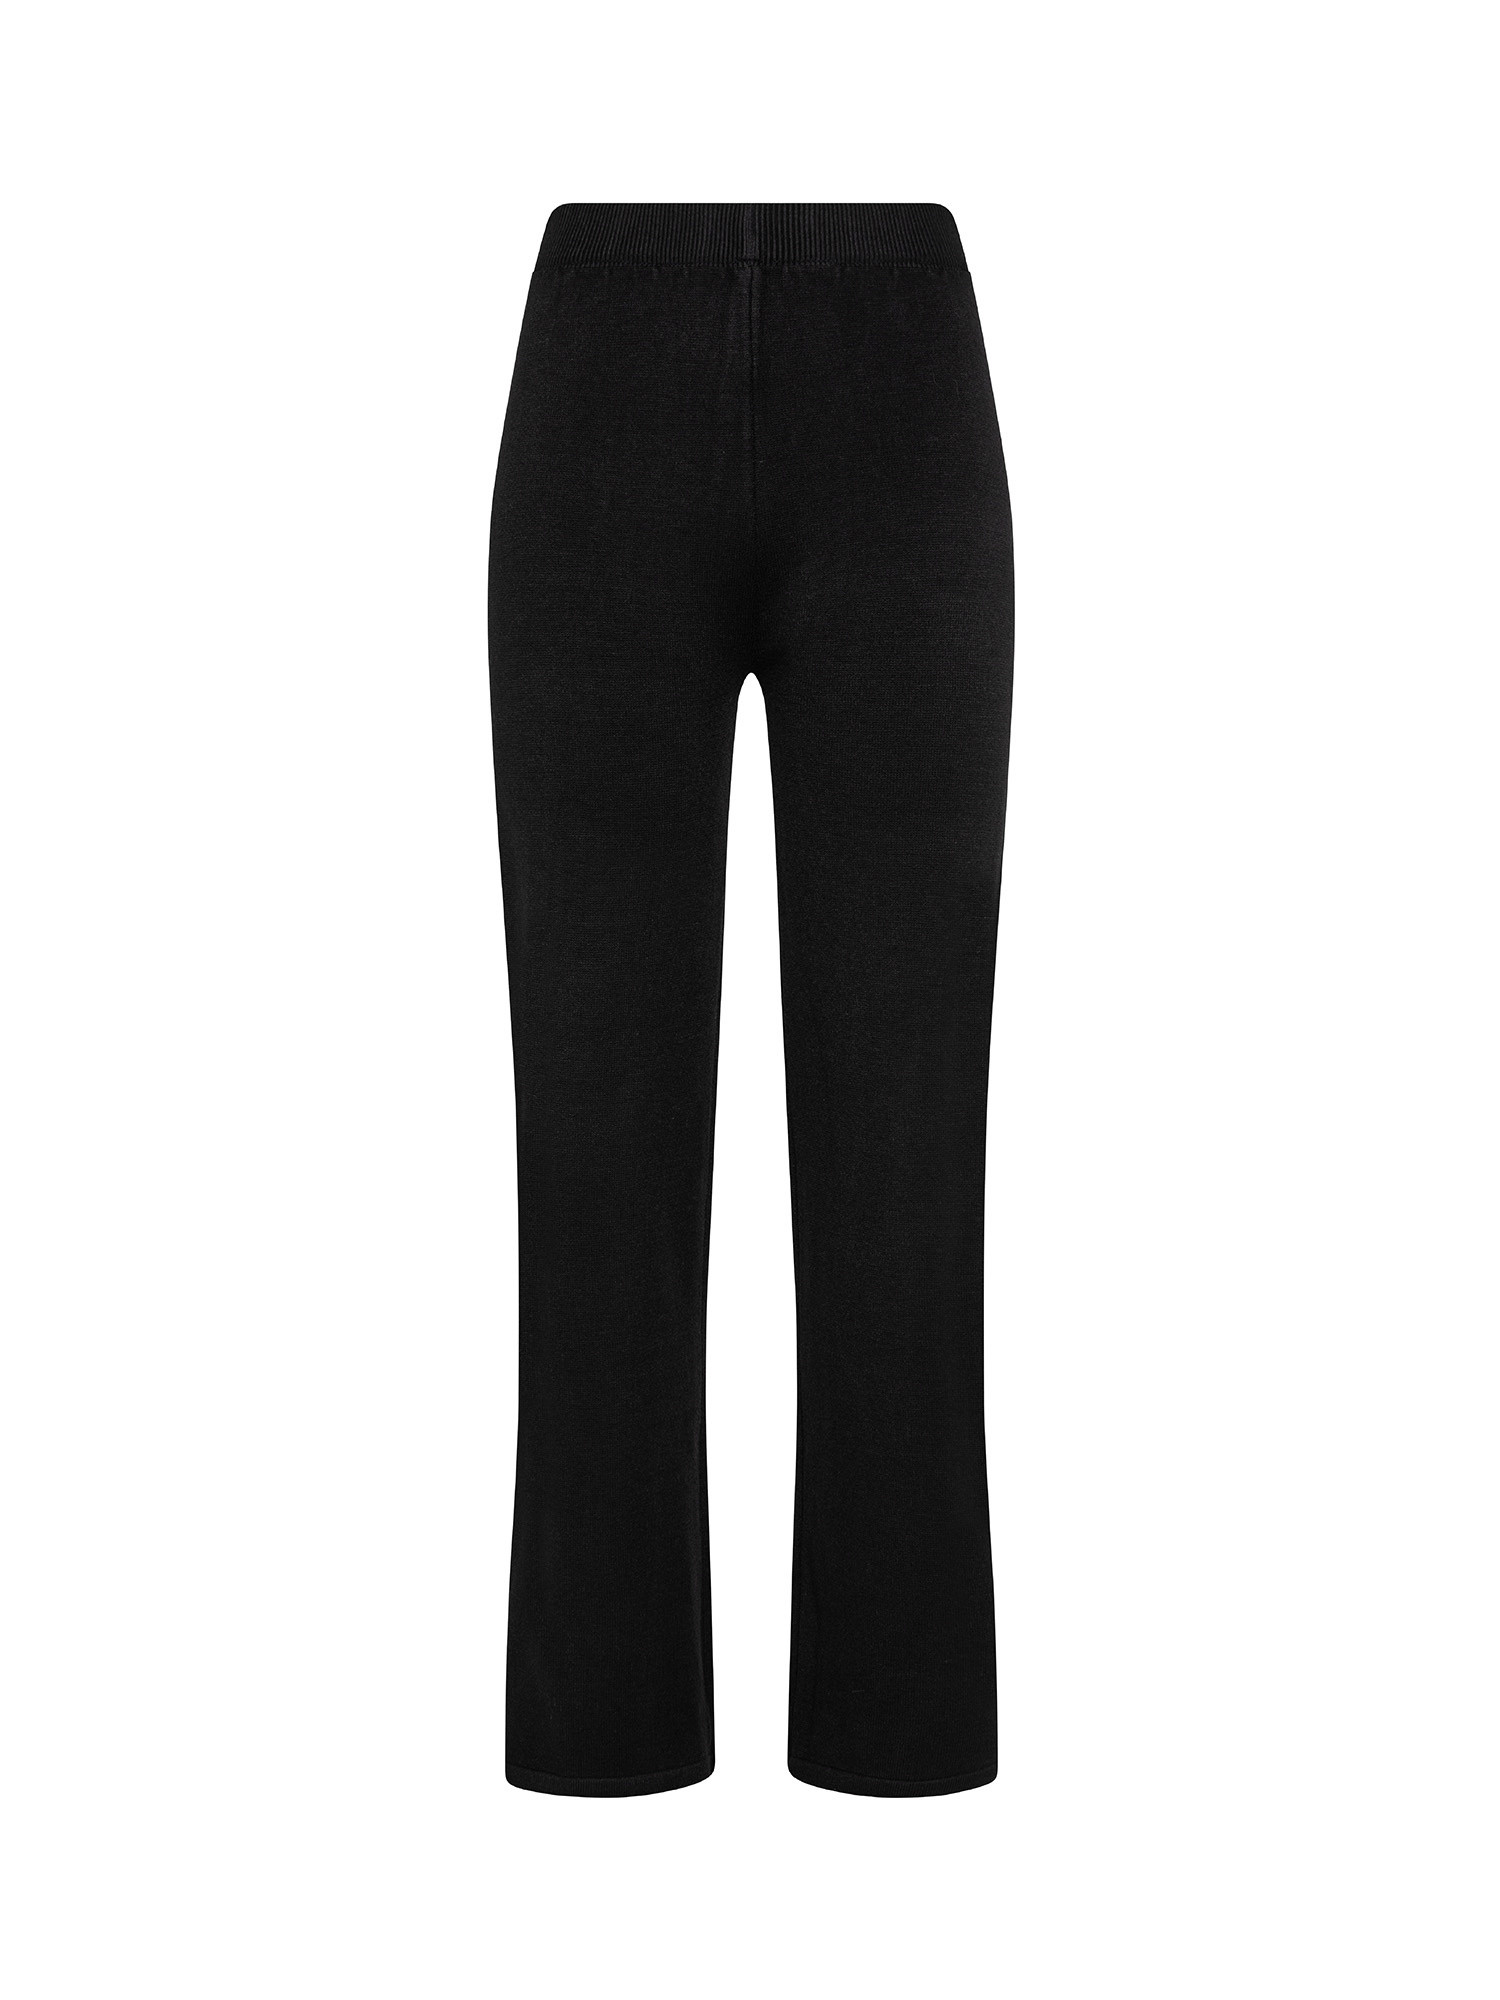 K Collection - Trousers, Black, large image number 0